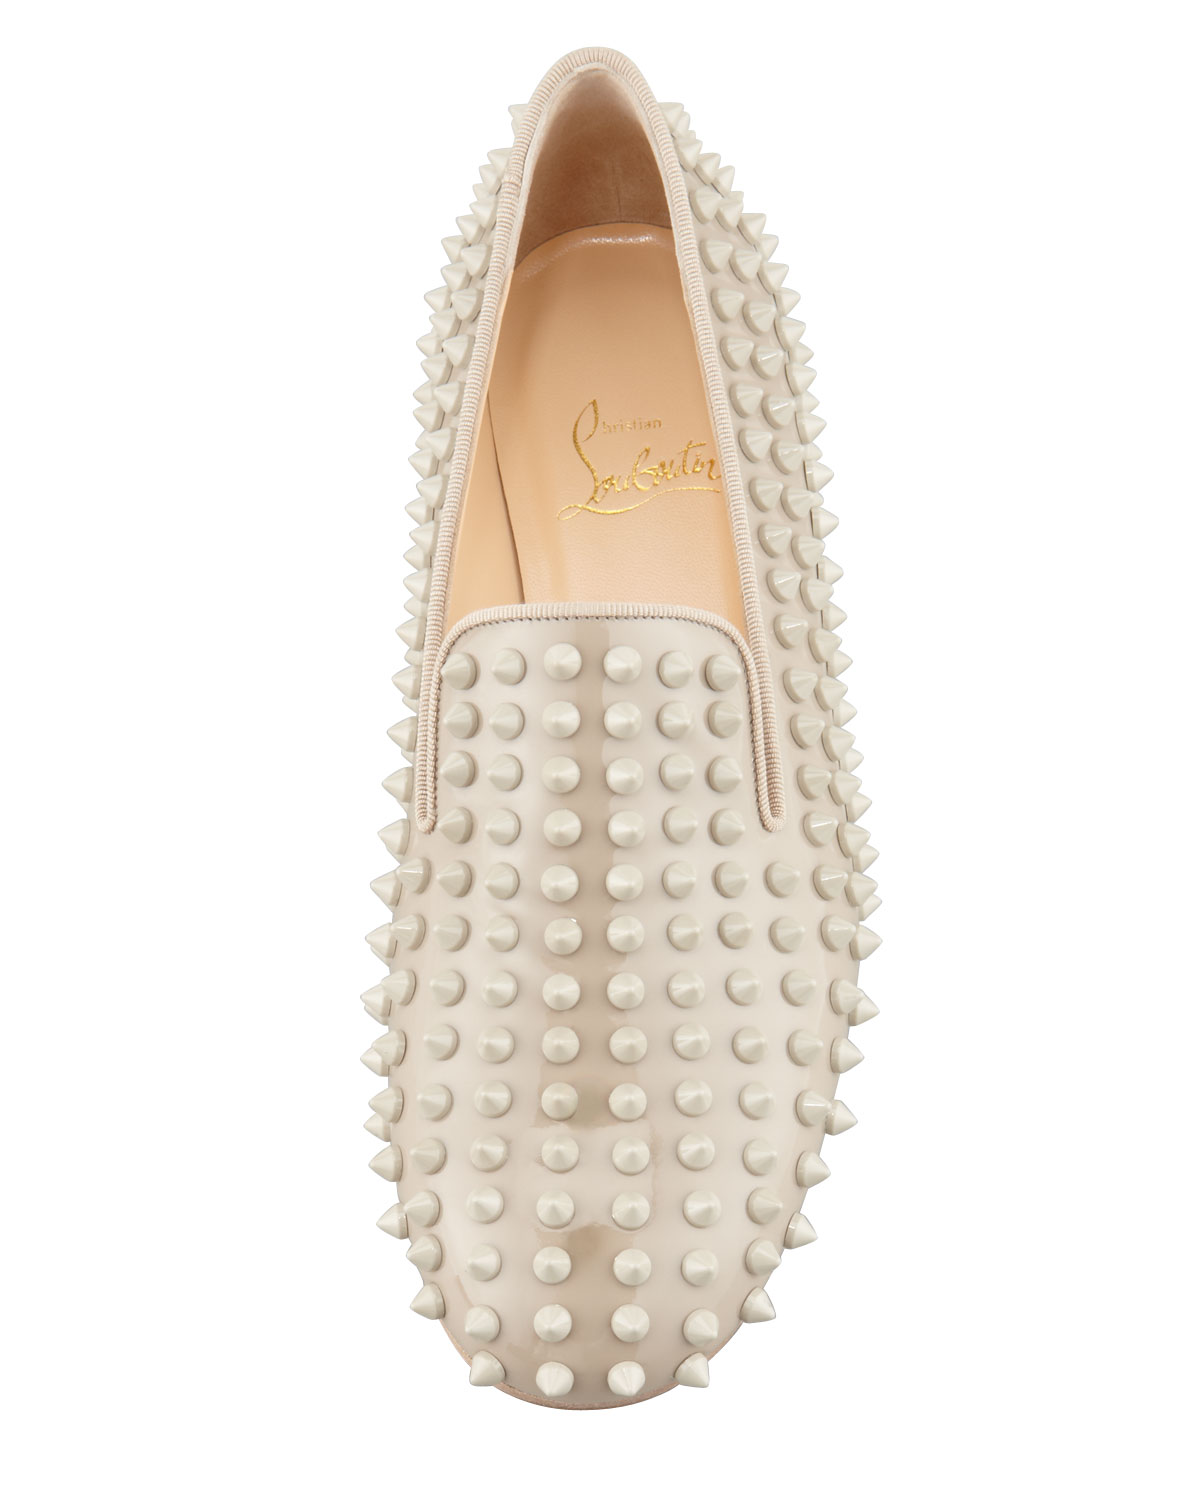 top christian louboutin replicas - Christian louboutin Rolling Spikes Red Sole Smoking Slipper in ...